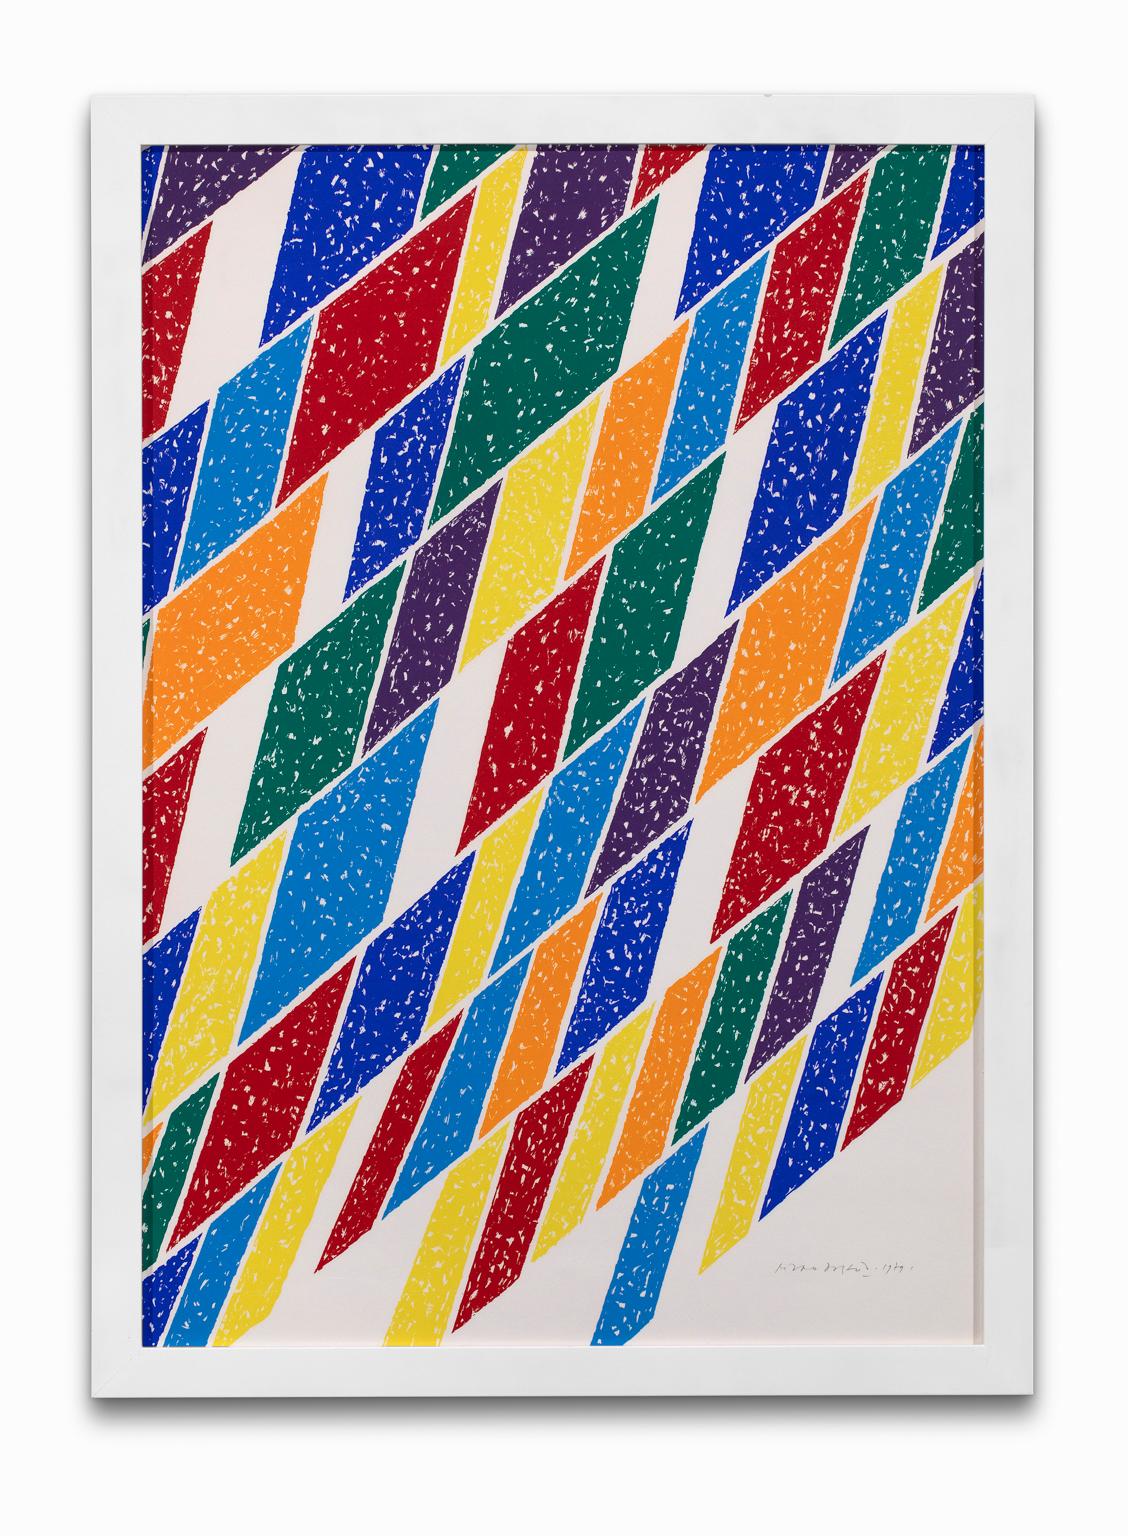 The work is a Lithograph, not numbered, but signed and dated by the artist, Piero Dorazio. The print has an intense color field with a strong linear element being composed of quadrilateral shapes that vary in size thus producing a kinetic energy